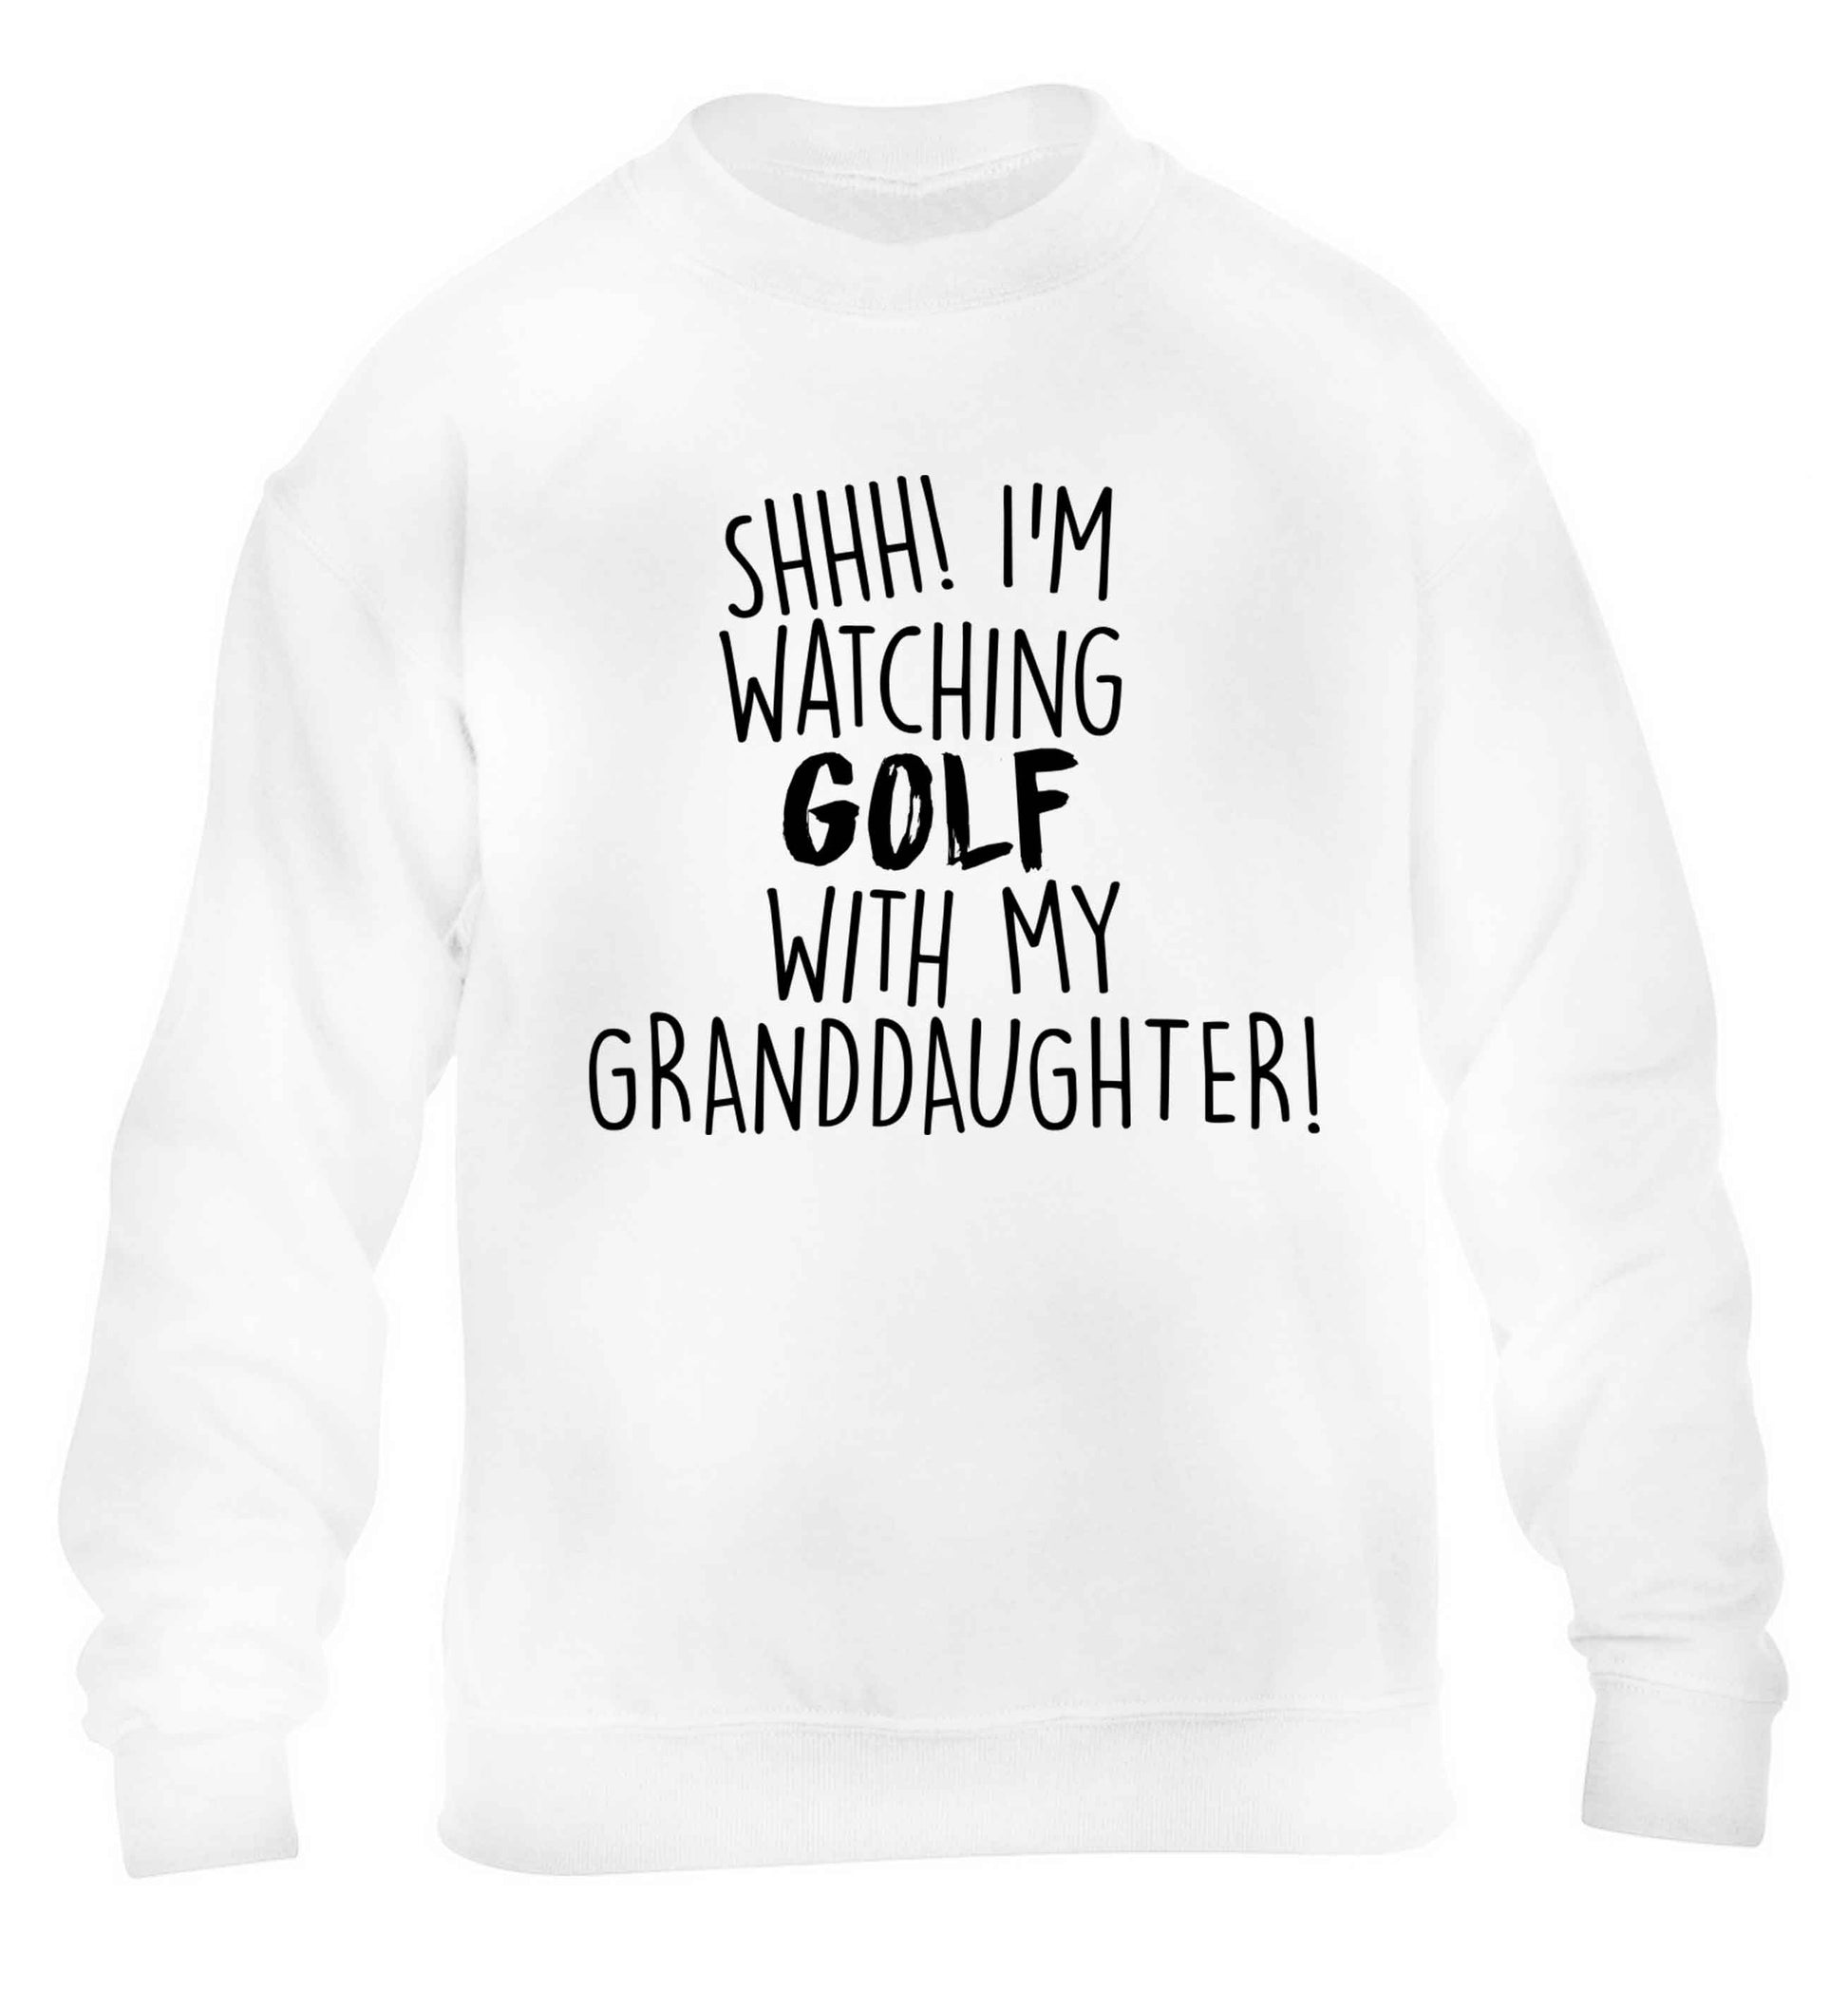 Shh I'm watching golf with my granddaughter children's white sweater 12-13 Years